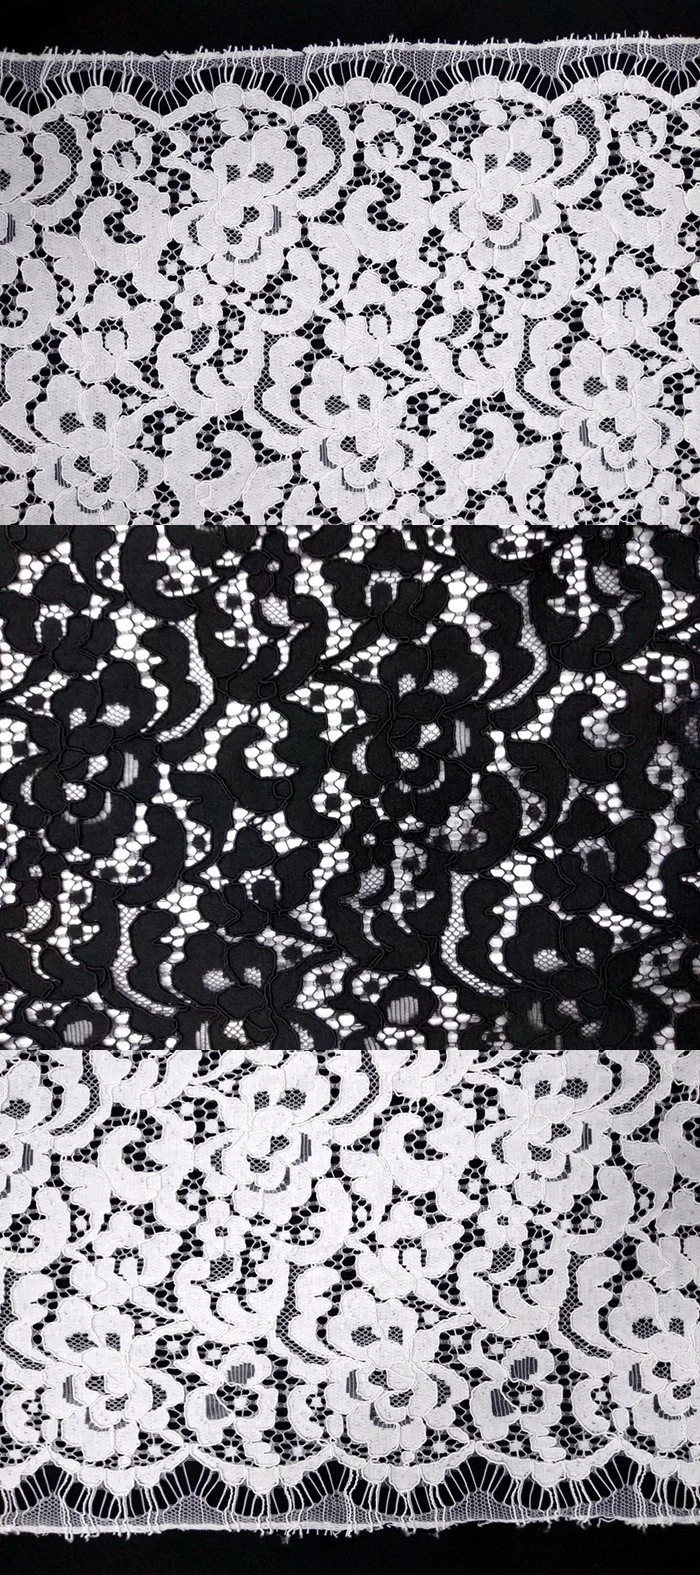 Custom 3D Characteristic Flower Laser Cut Chemical Lace Fabric Patchwork Lace Fabric Tulle Embroidery Lace for Garment Accessorice